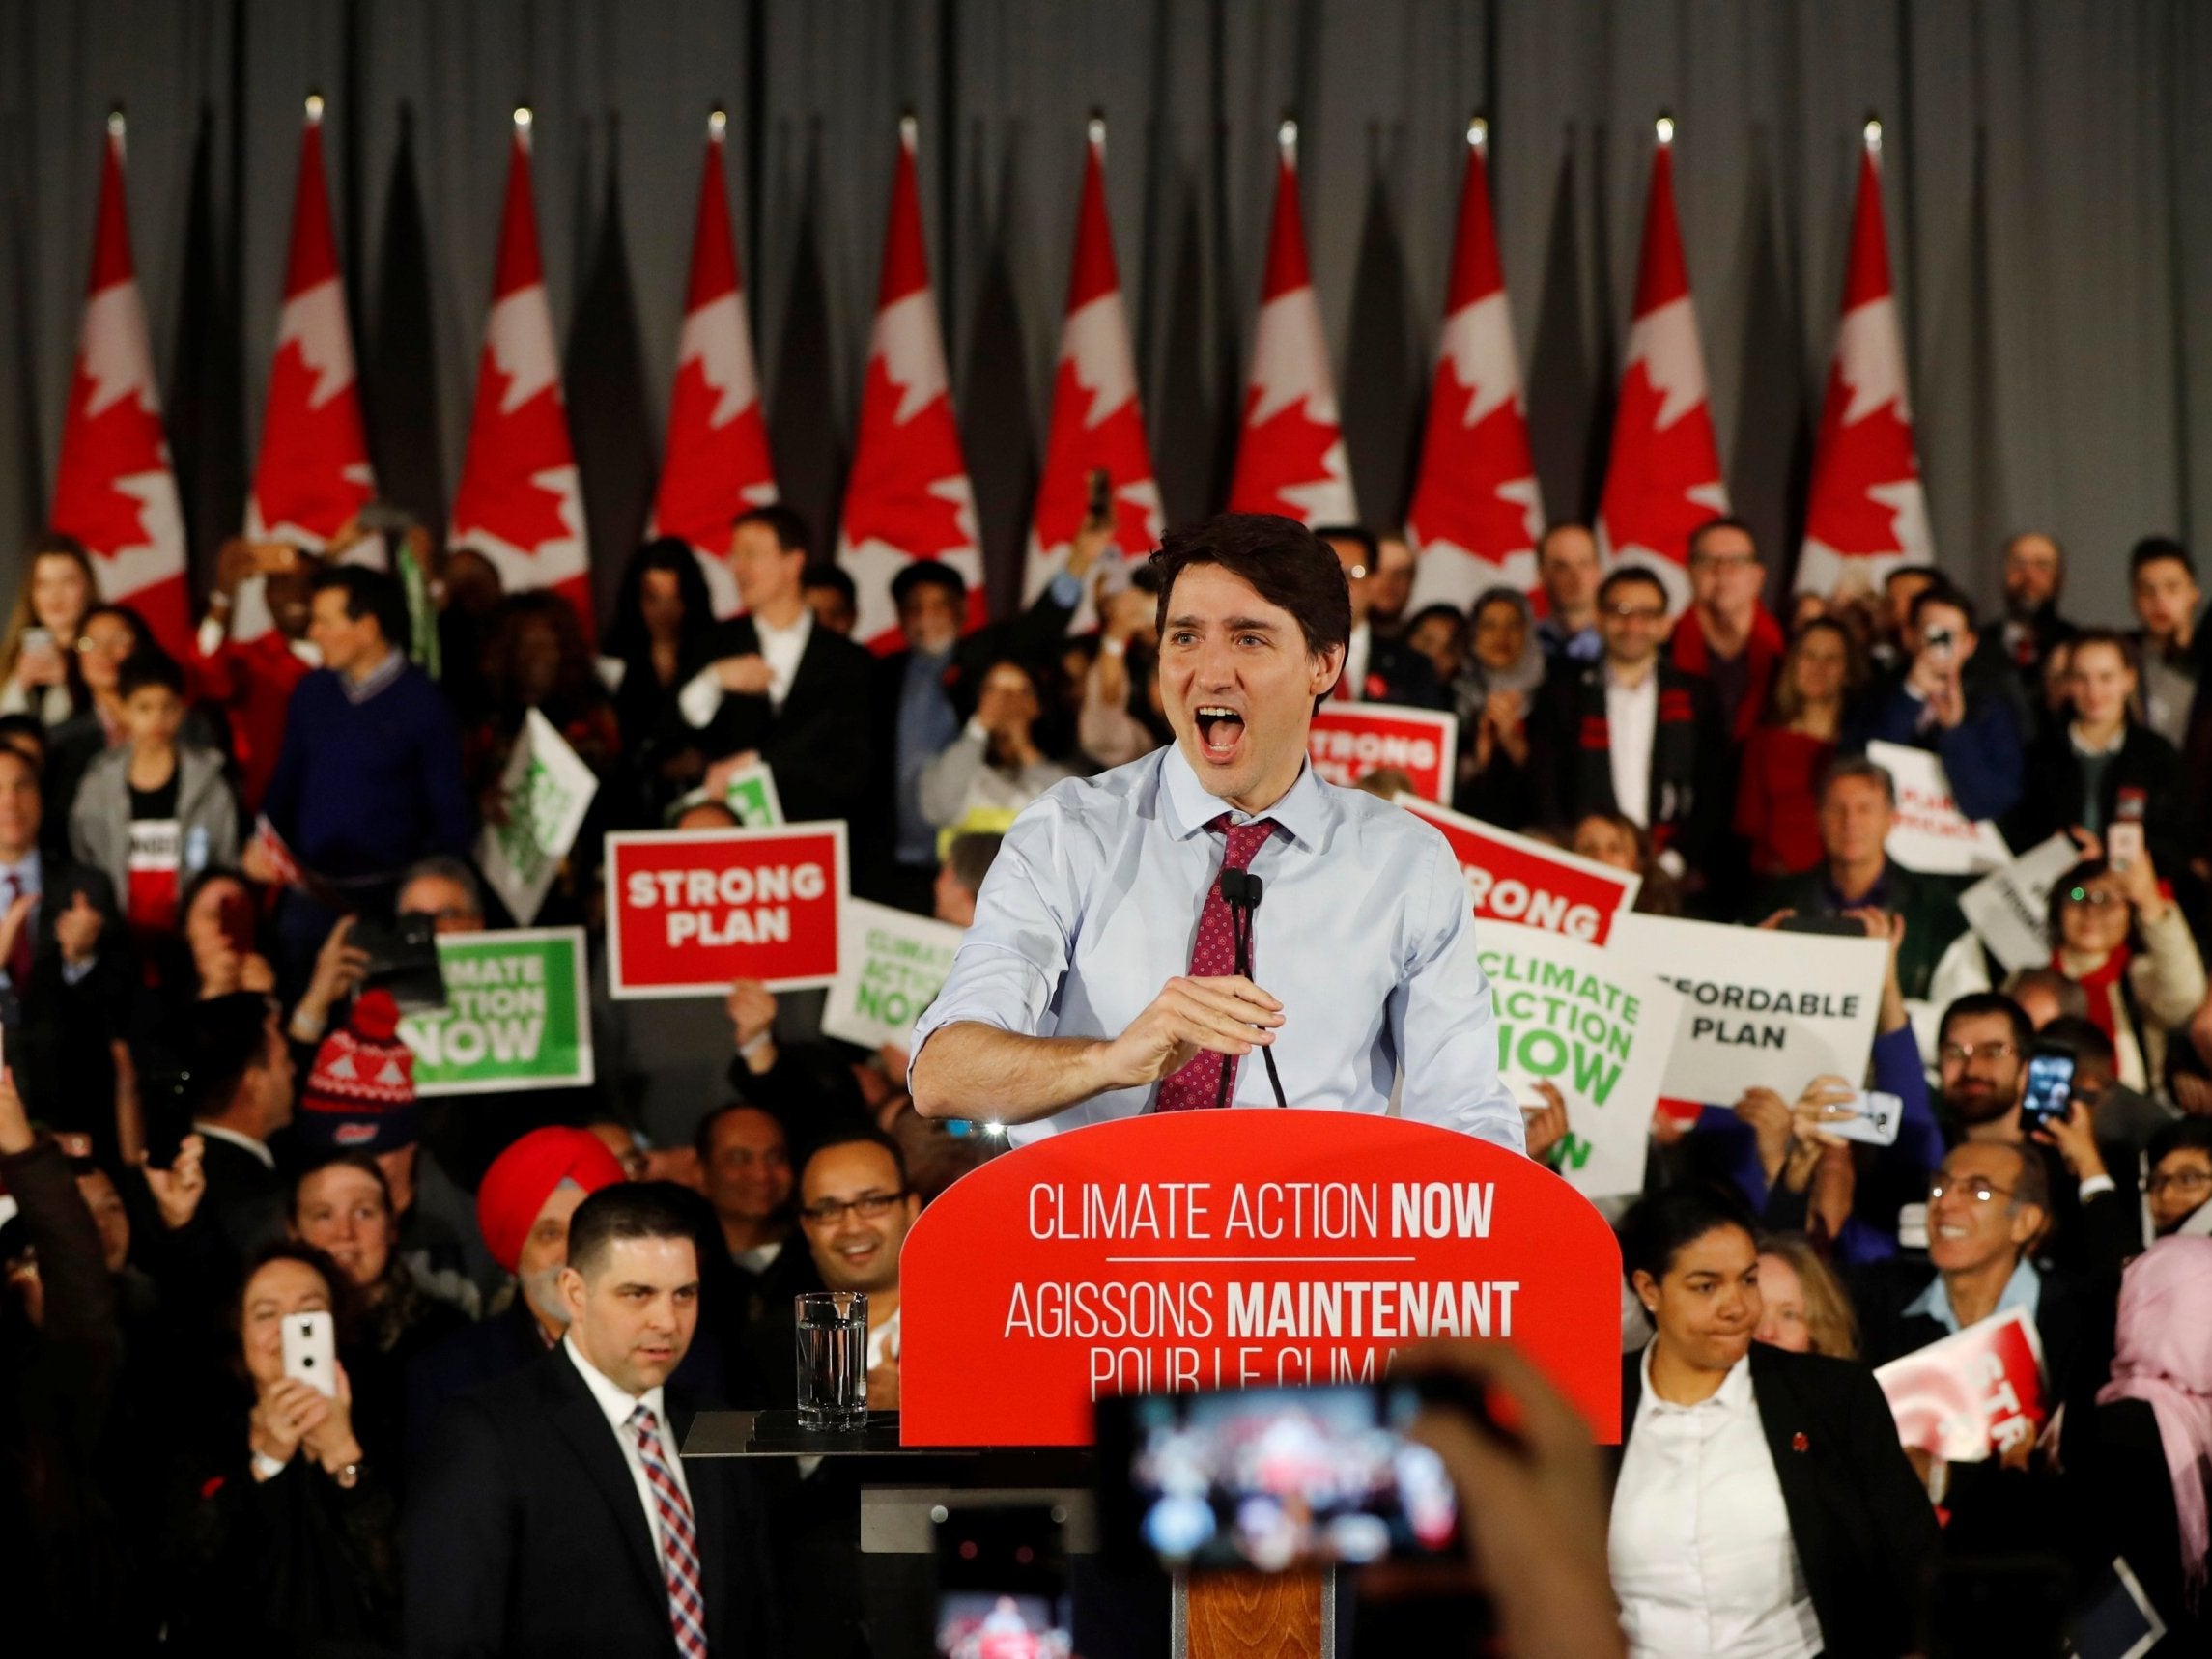 Justin Trudeau is under increasing pressure over the bribery scandal